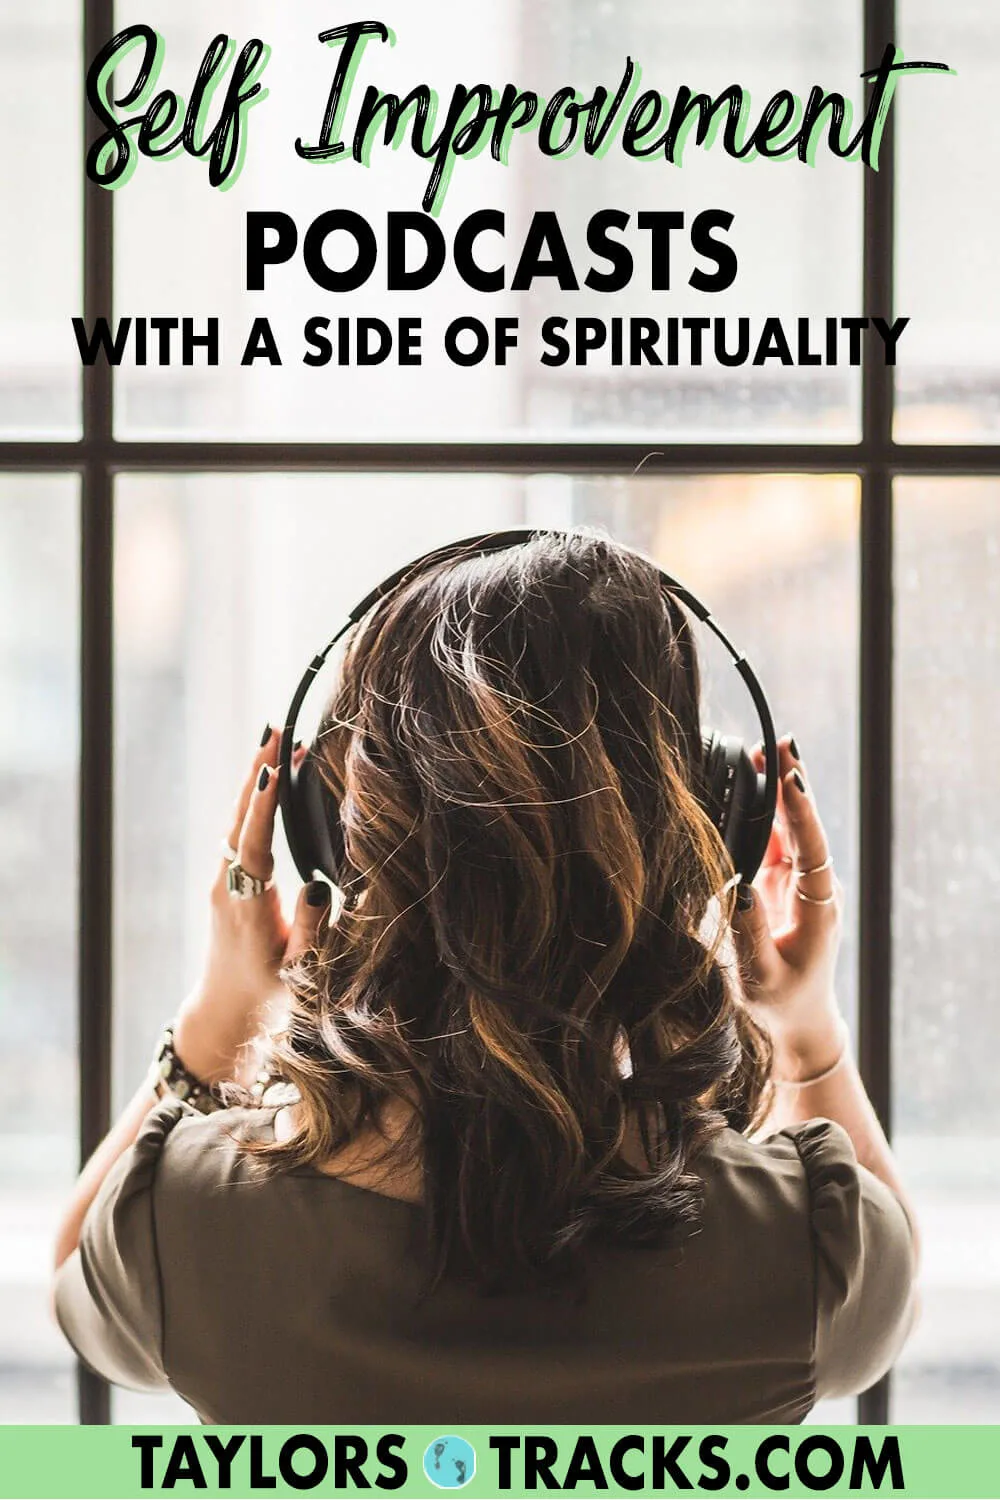 Self improvement podcasts don’t have to be all about doing. These podcasts for women combine spirituality with personal development so that you can find flow, ease and letting go as easily as you can do, accomplish and thrive. Click to find your next inspirational self growth podcast!